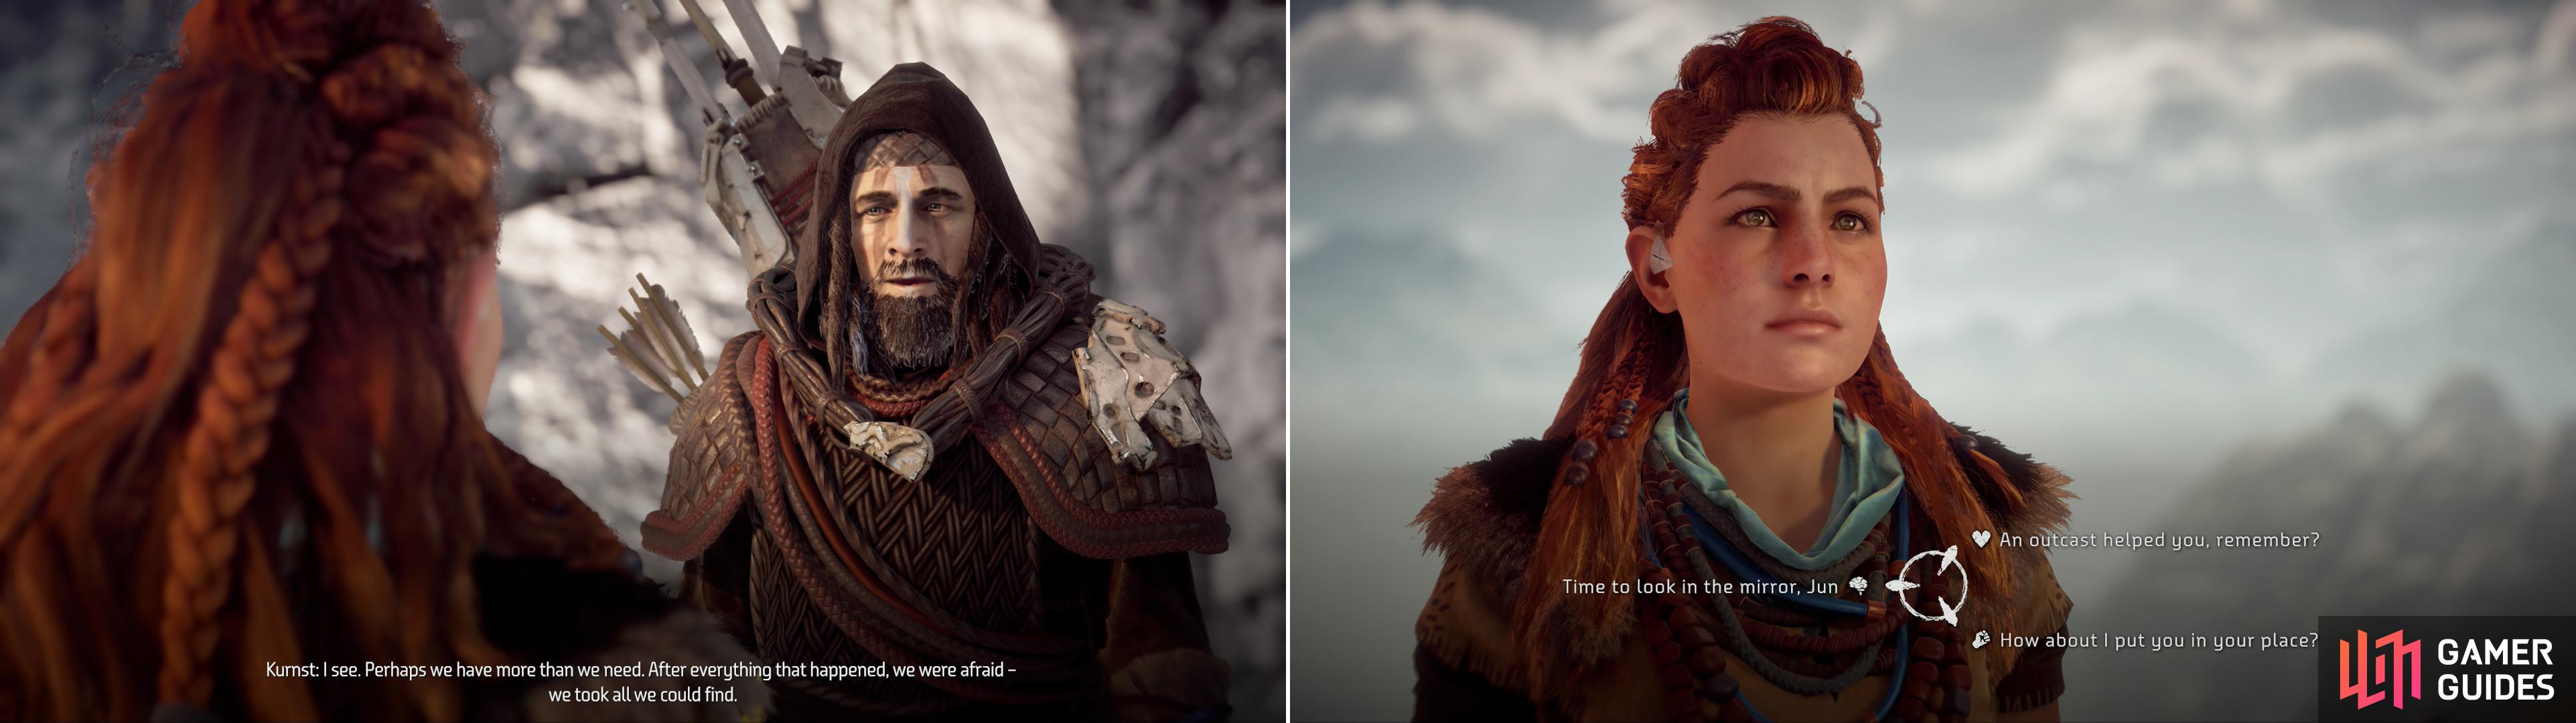 Aloy and the leader of the outcasts will come to terms without trouble (left) after which you’ll get a chance to make a trialogue response to a vitriolic Jun (right).